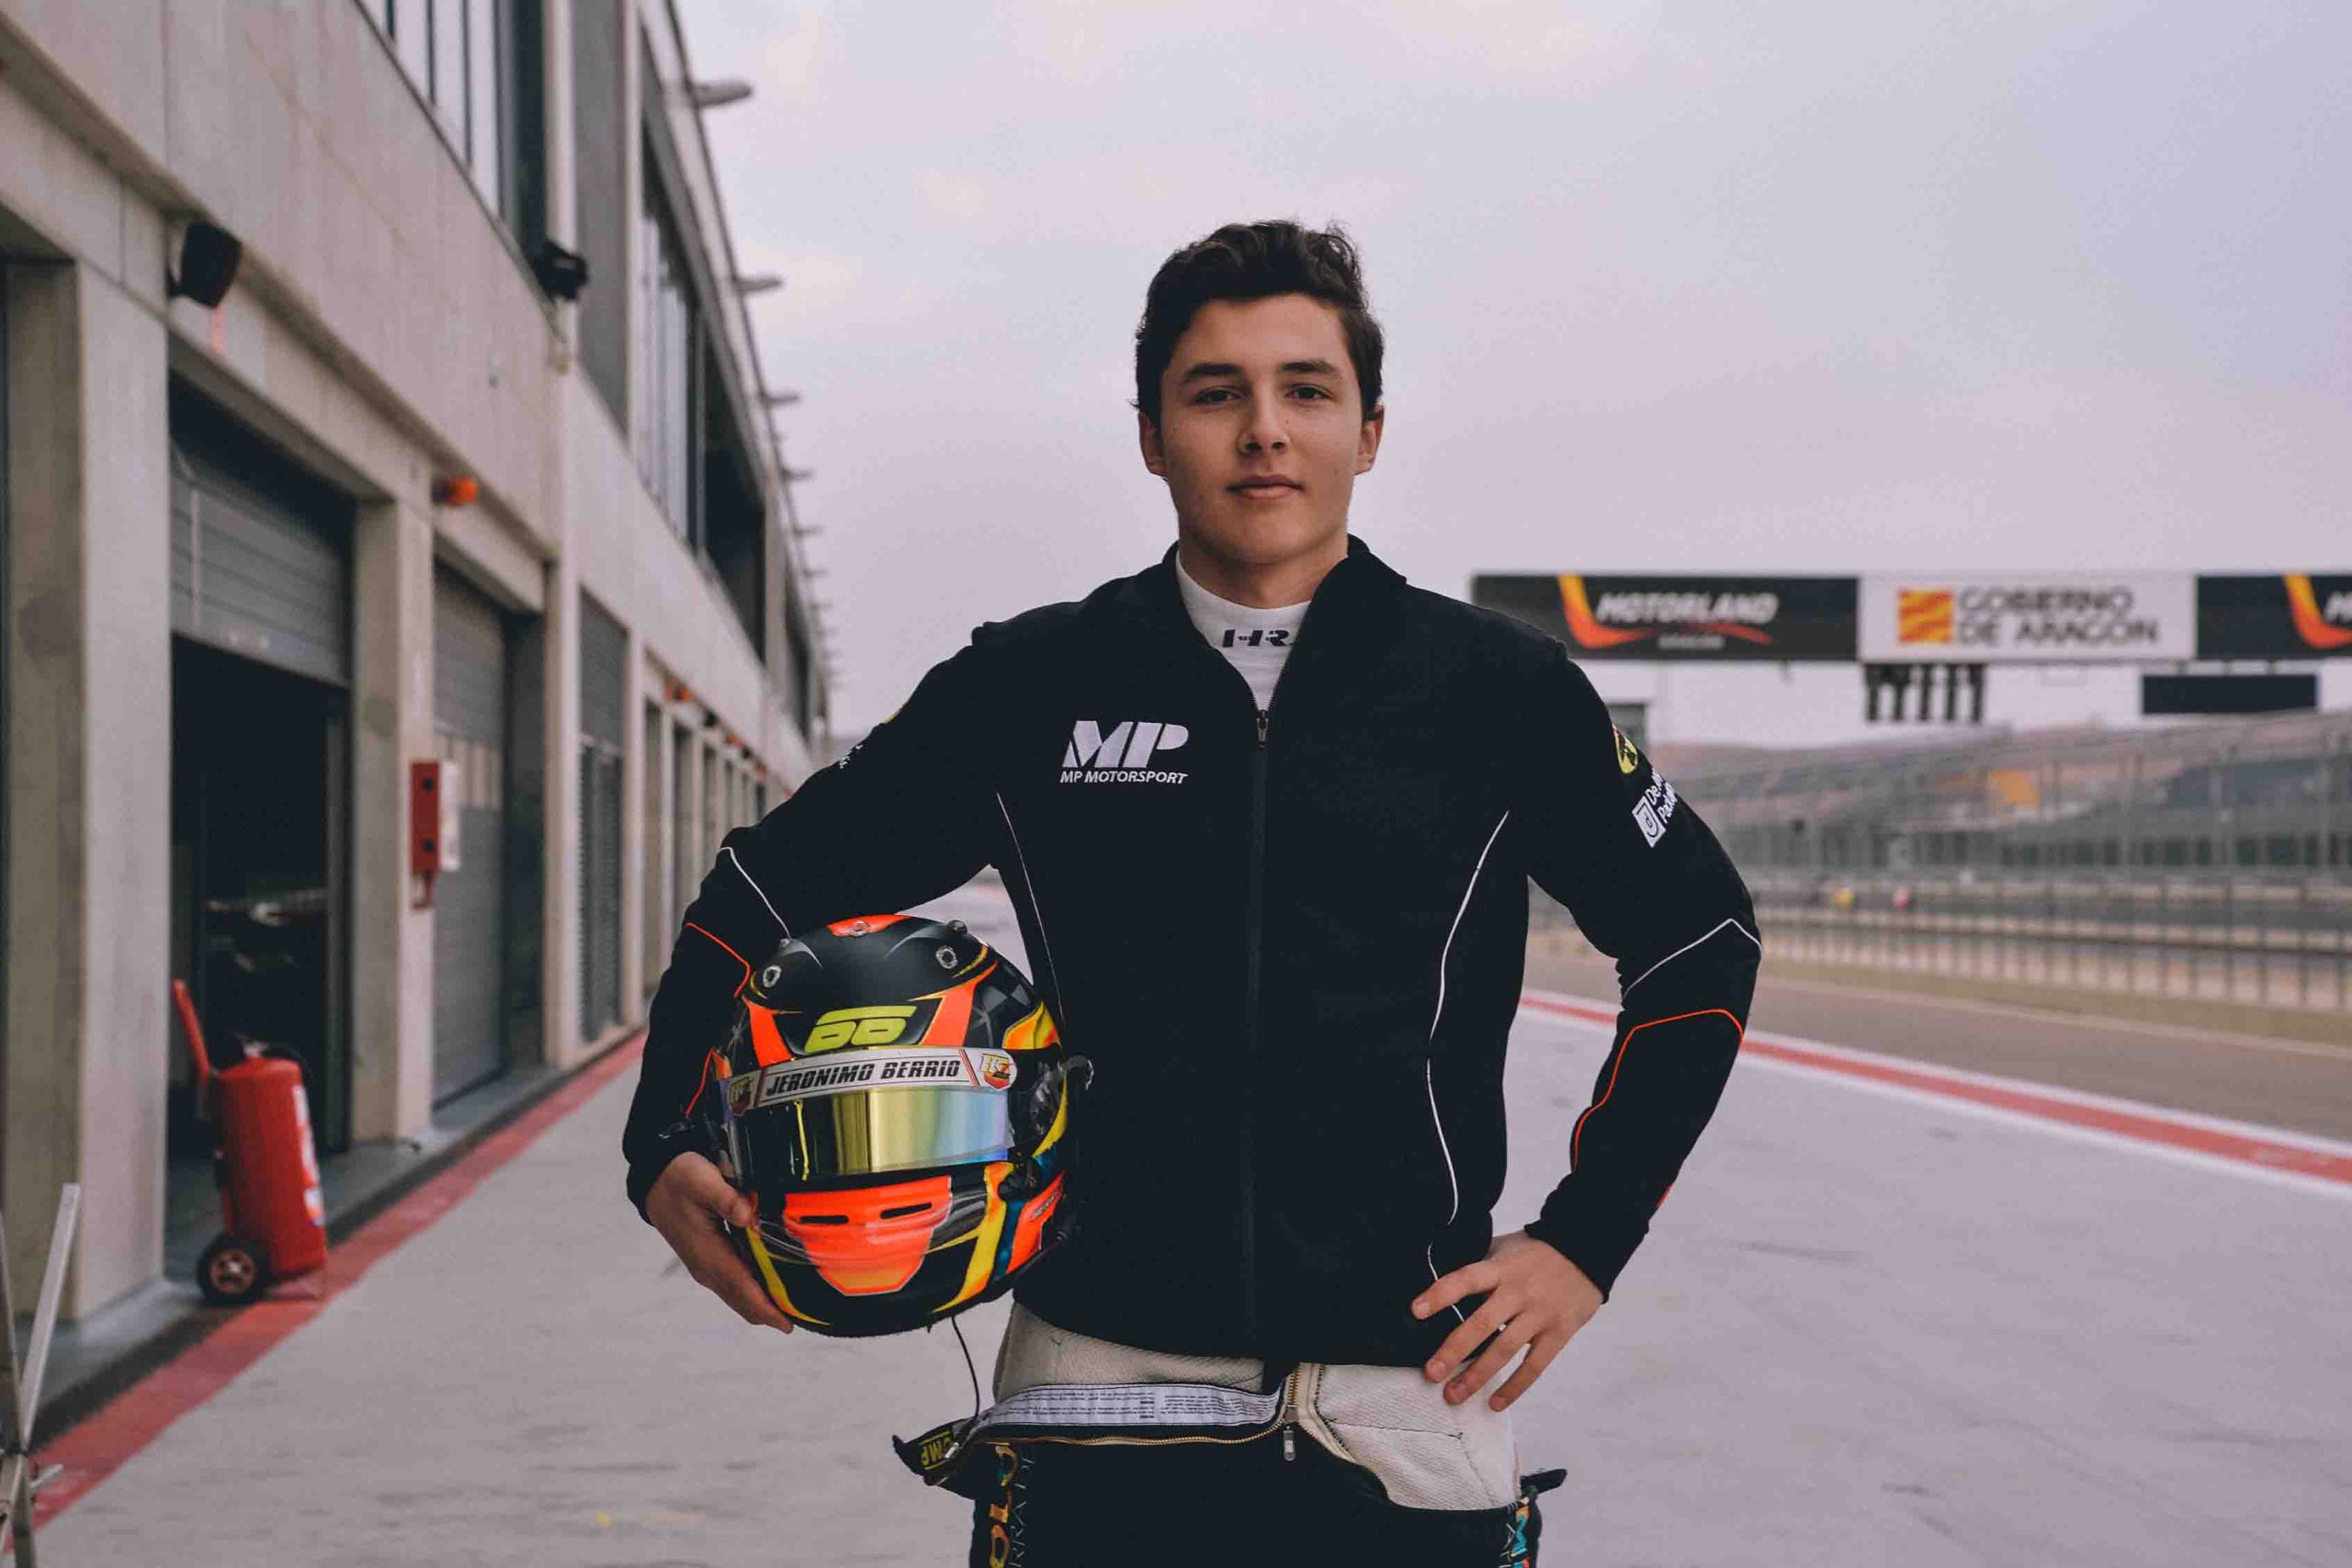 Jerónimo Berrío moves to Spanish F4 with MP Motorsport